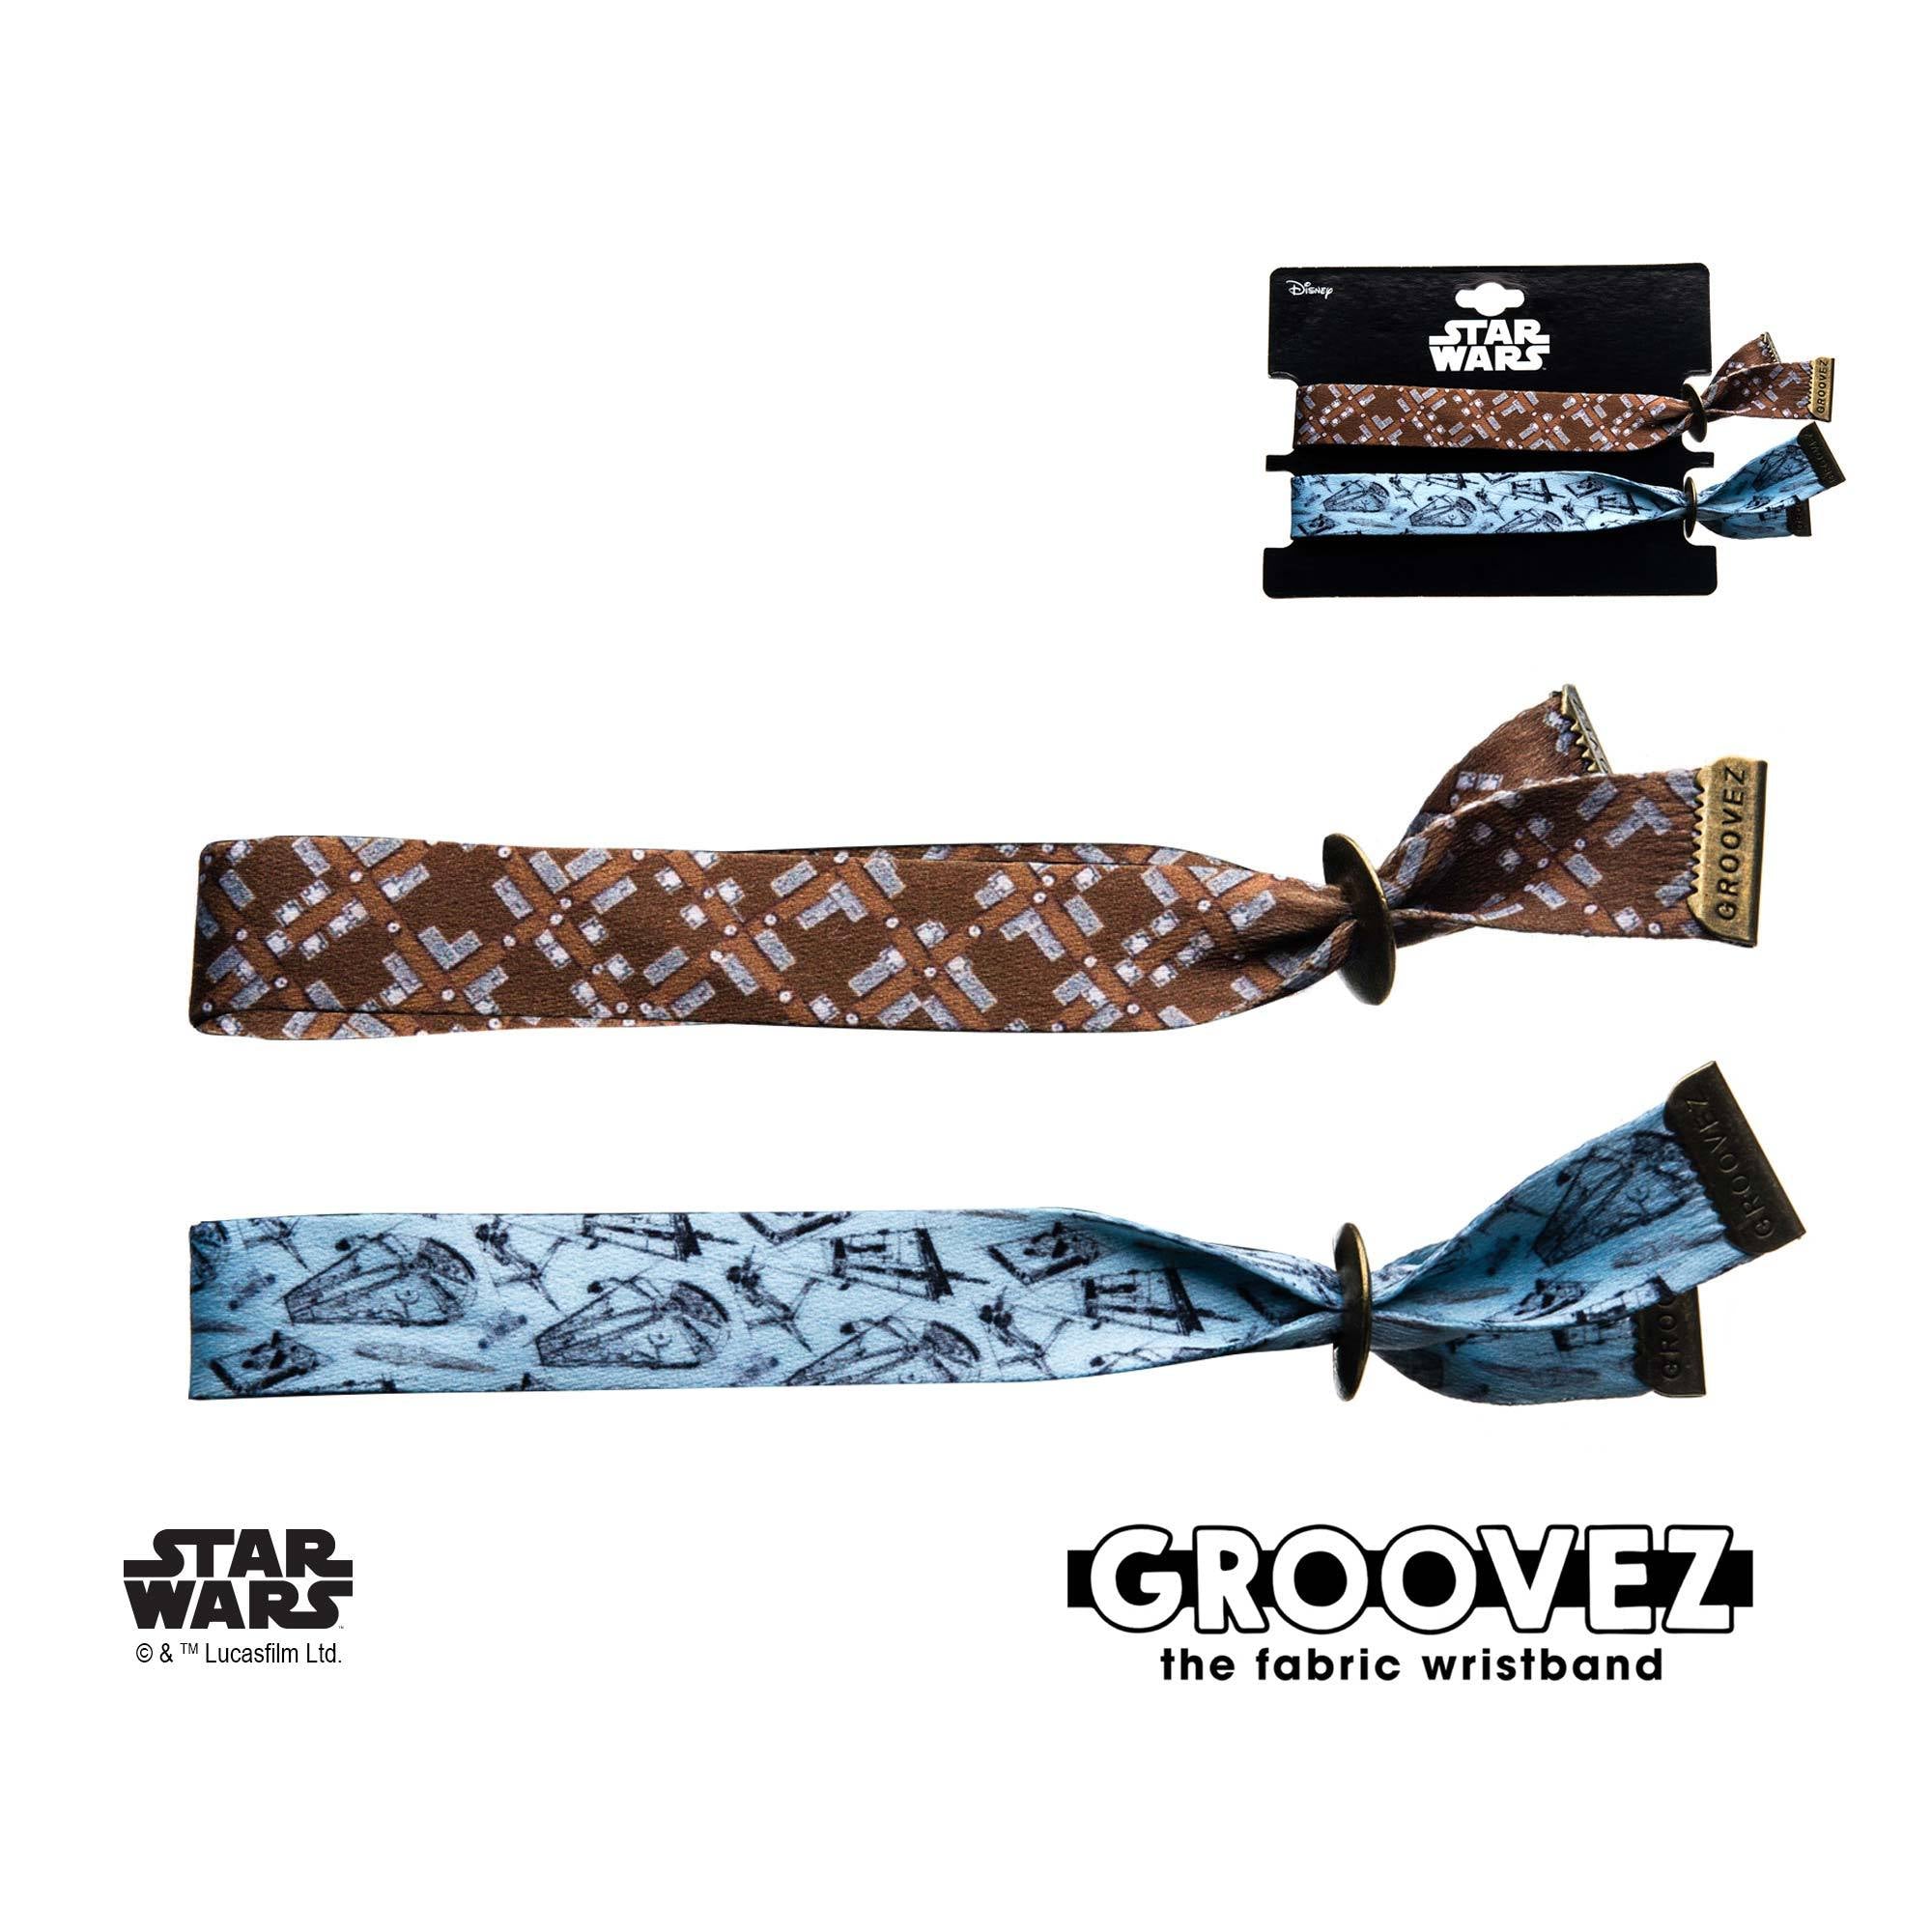 Star Wars Chewbacca and Han Solo Grooves (tm) Fabric Bracelet Set